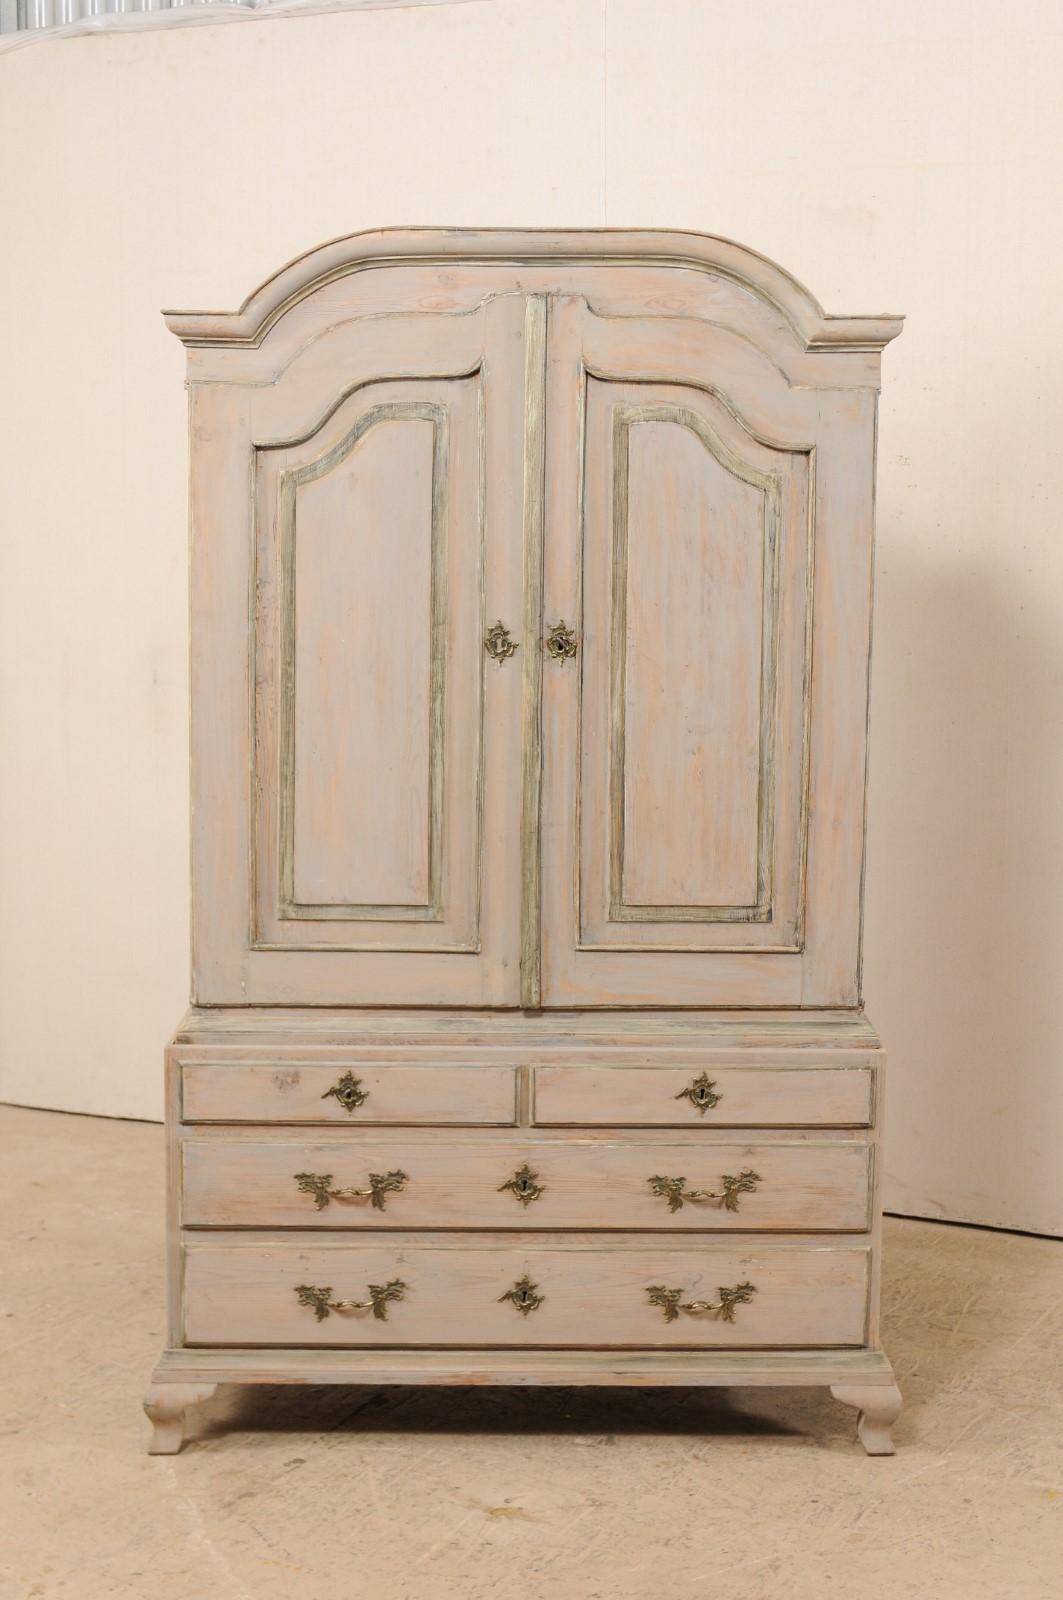 Carved An 18th C. Swedish Period Rococo Tall Painted Wood Cabinet w/Arched Pediment